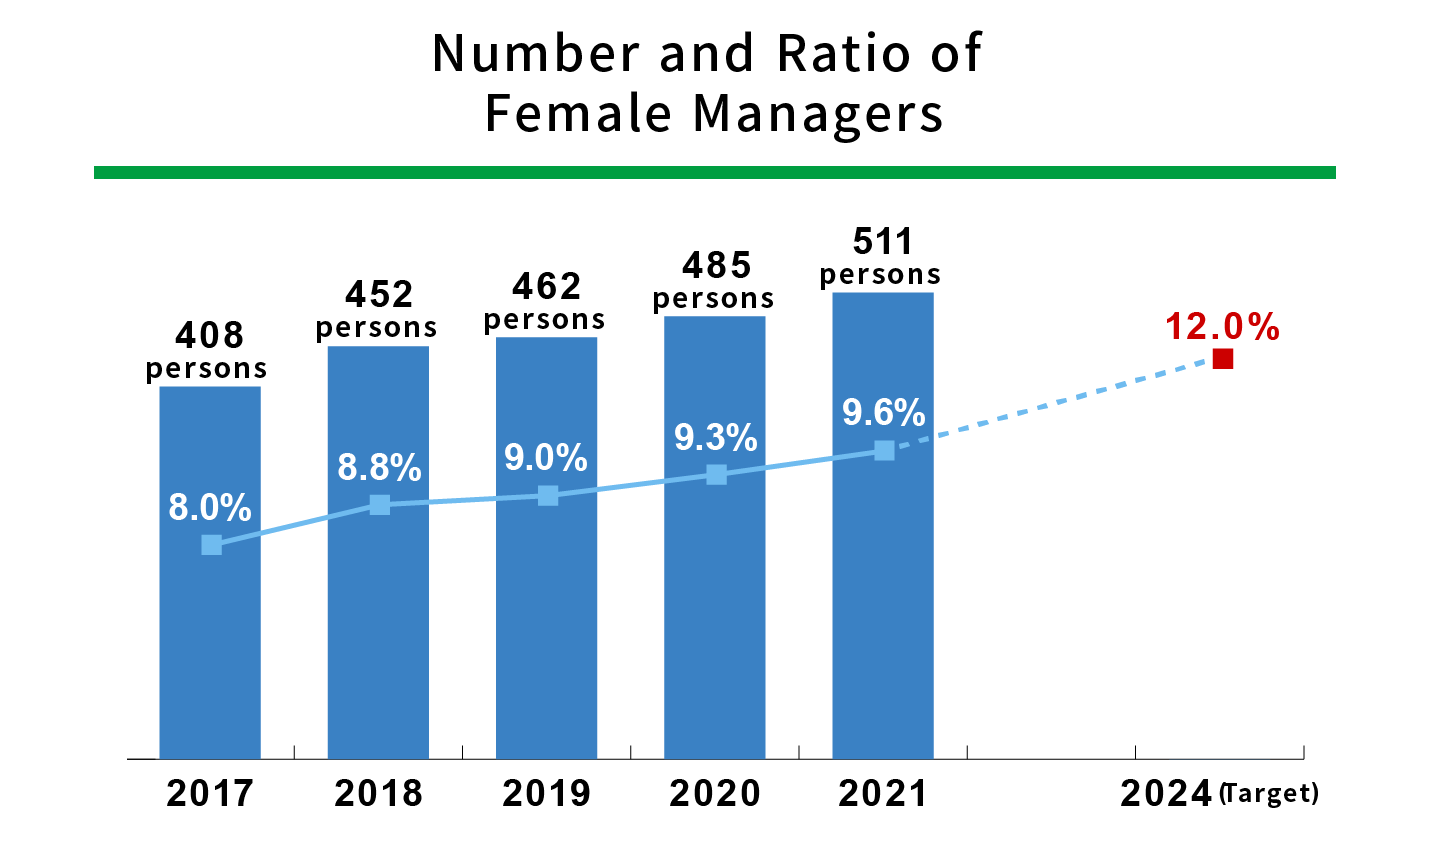 Number and Ratio of Female Managers